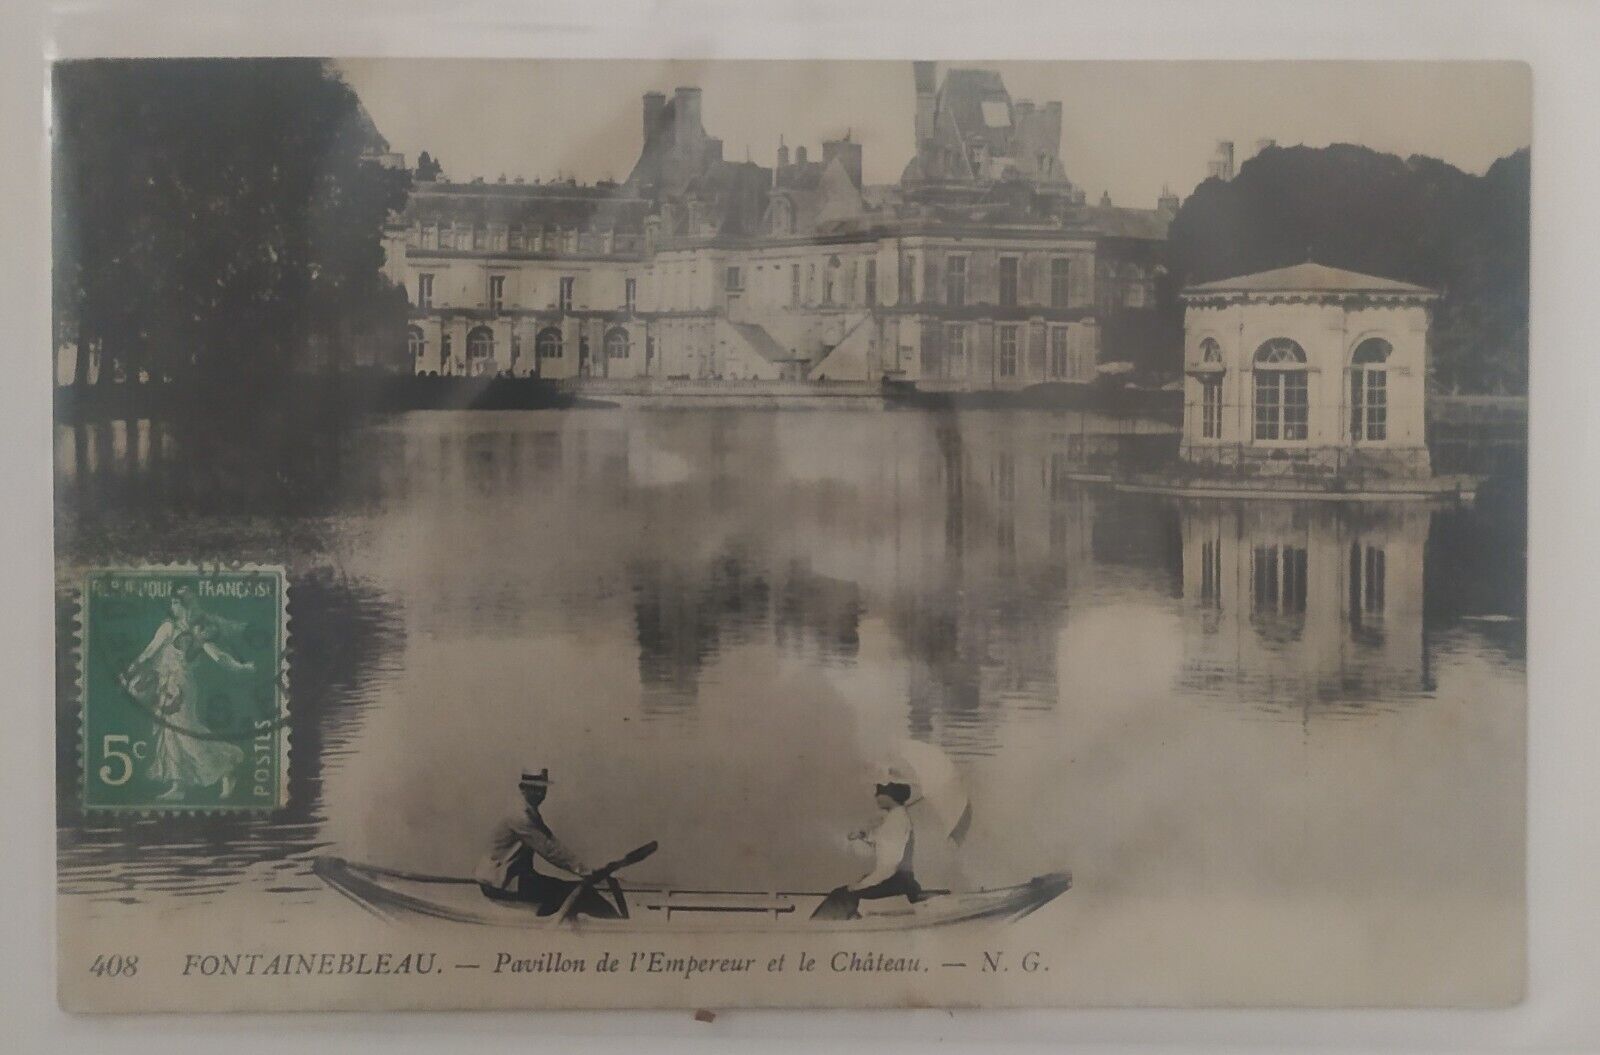 Old postcard from France (Fontainebleau, 1916)